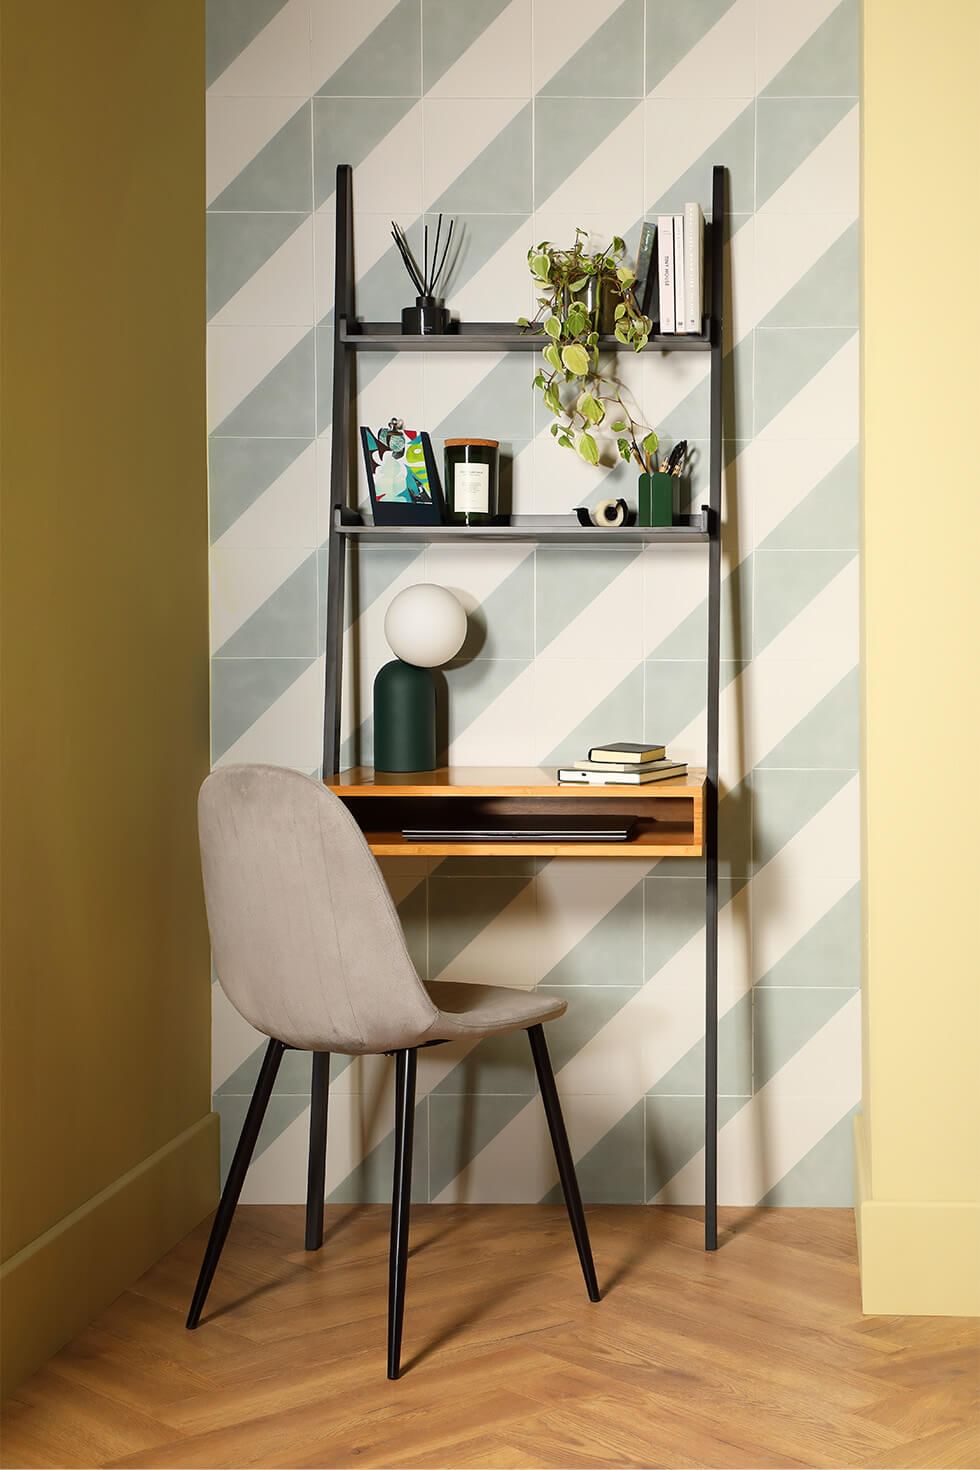 An alcove turned into an office or study area with a modern chair and desk